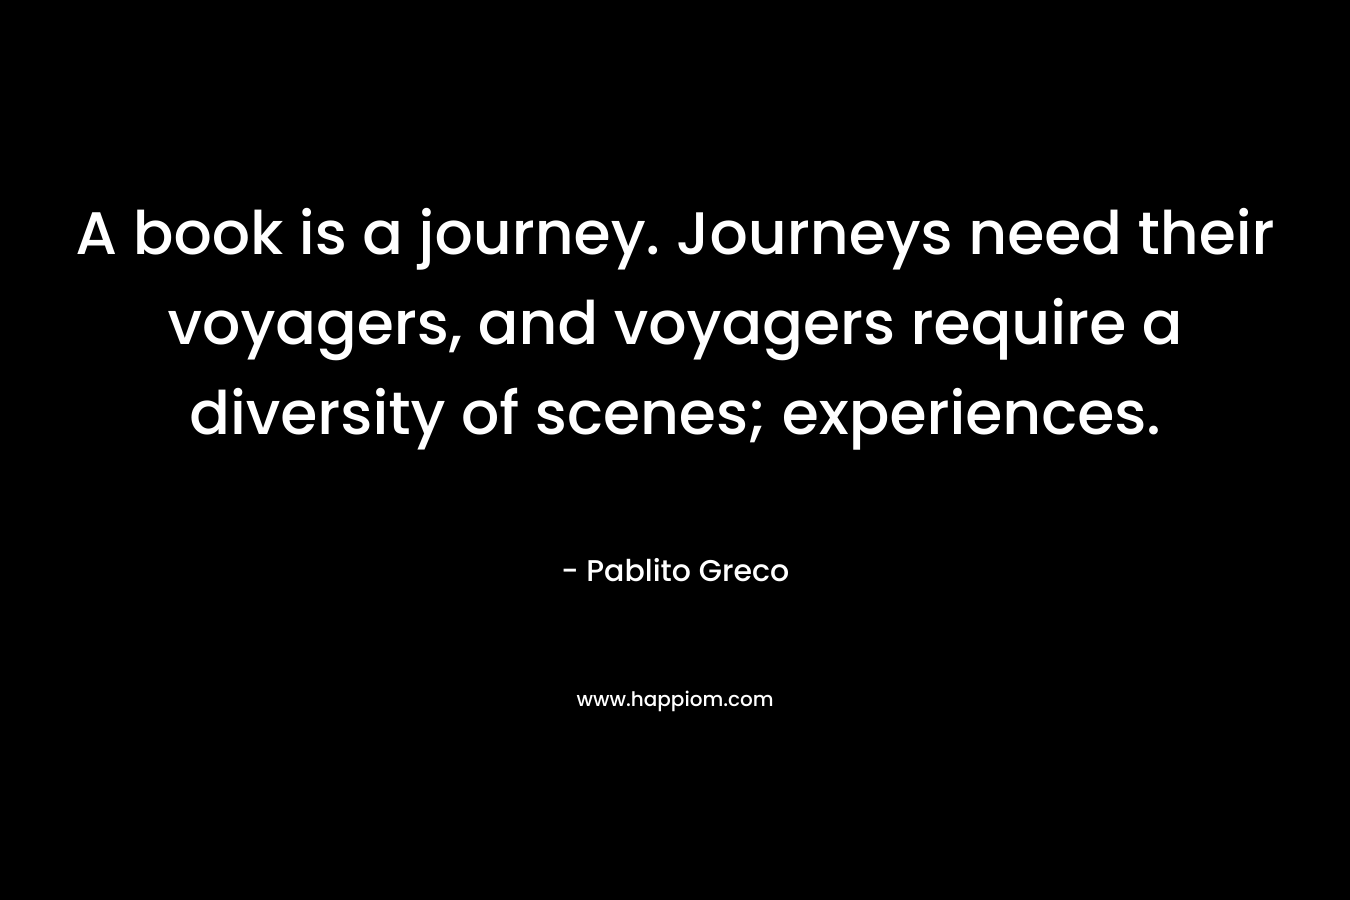 A book is a journey. Journeys need their voyagers, and voyagers require a diversity of scenes; experiences. – Pablito Greco